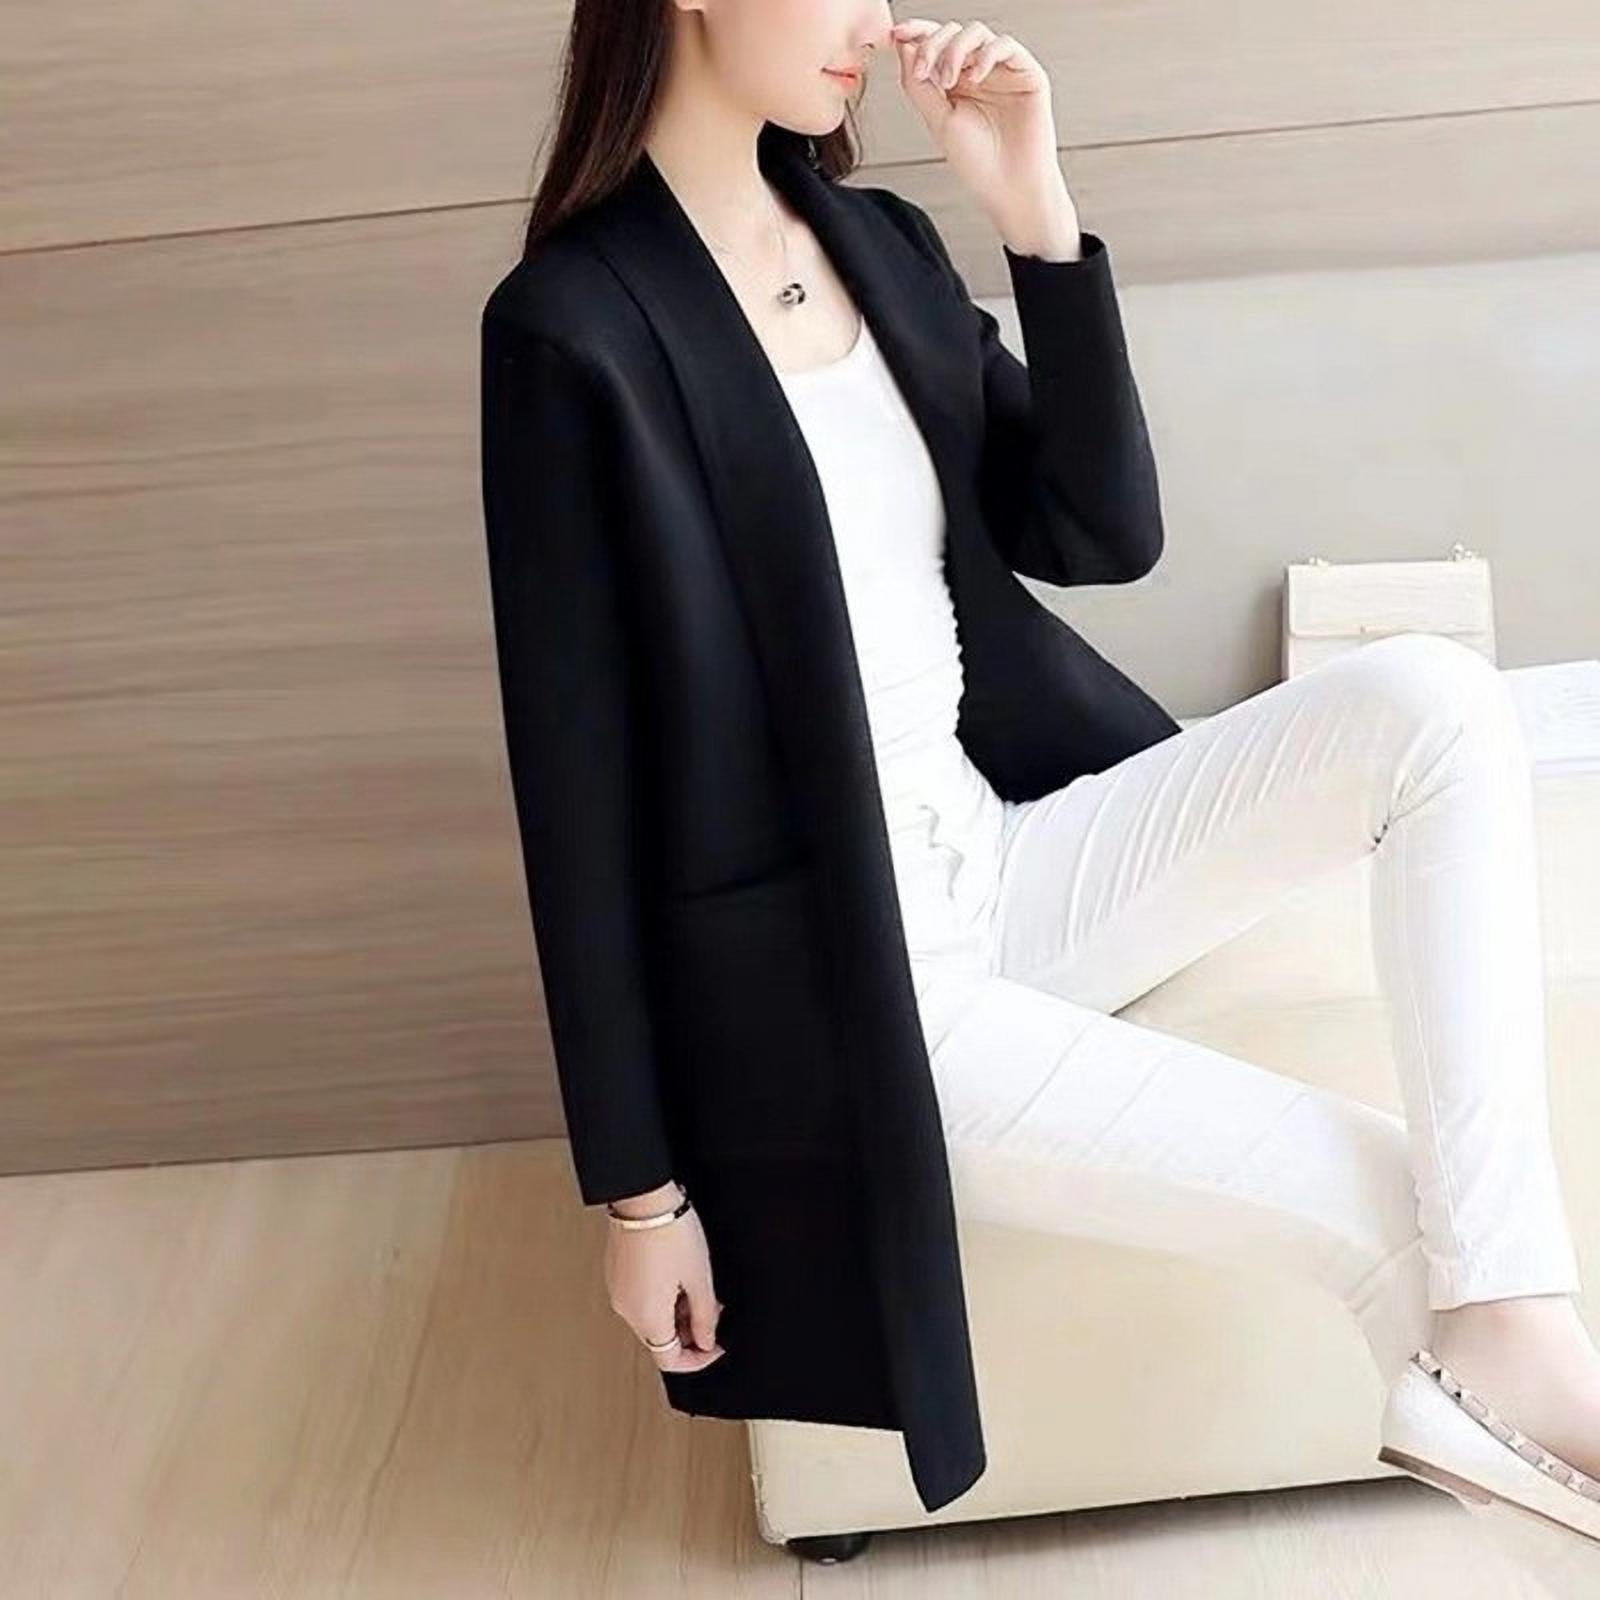 Doreleven Womens Casual Cardigan Jacket,Long Sleeve Open Front Blazer Ruched with Pockets Office Work Coat Outerwear 